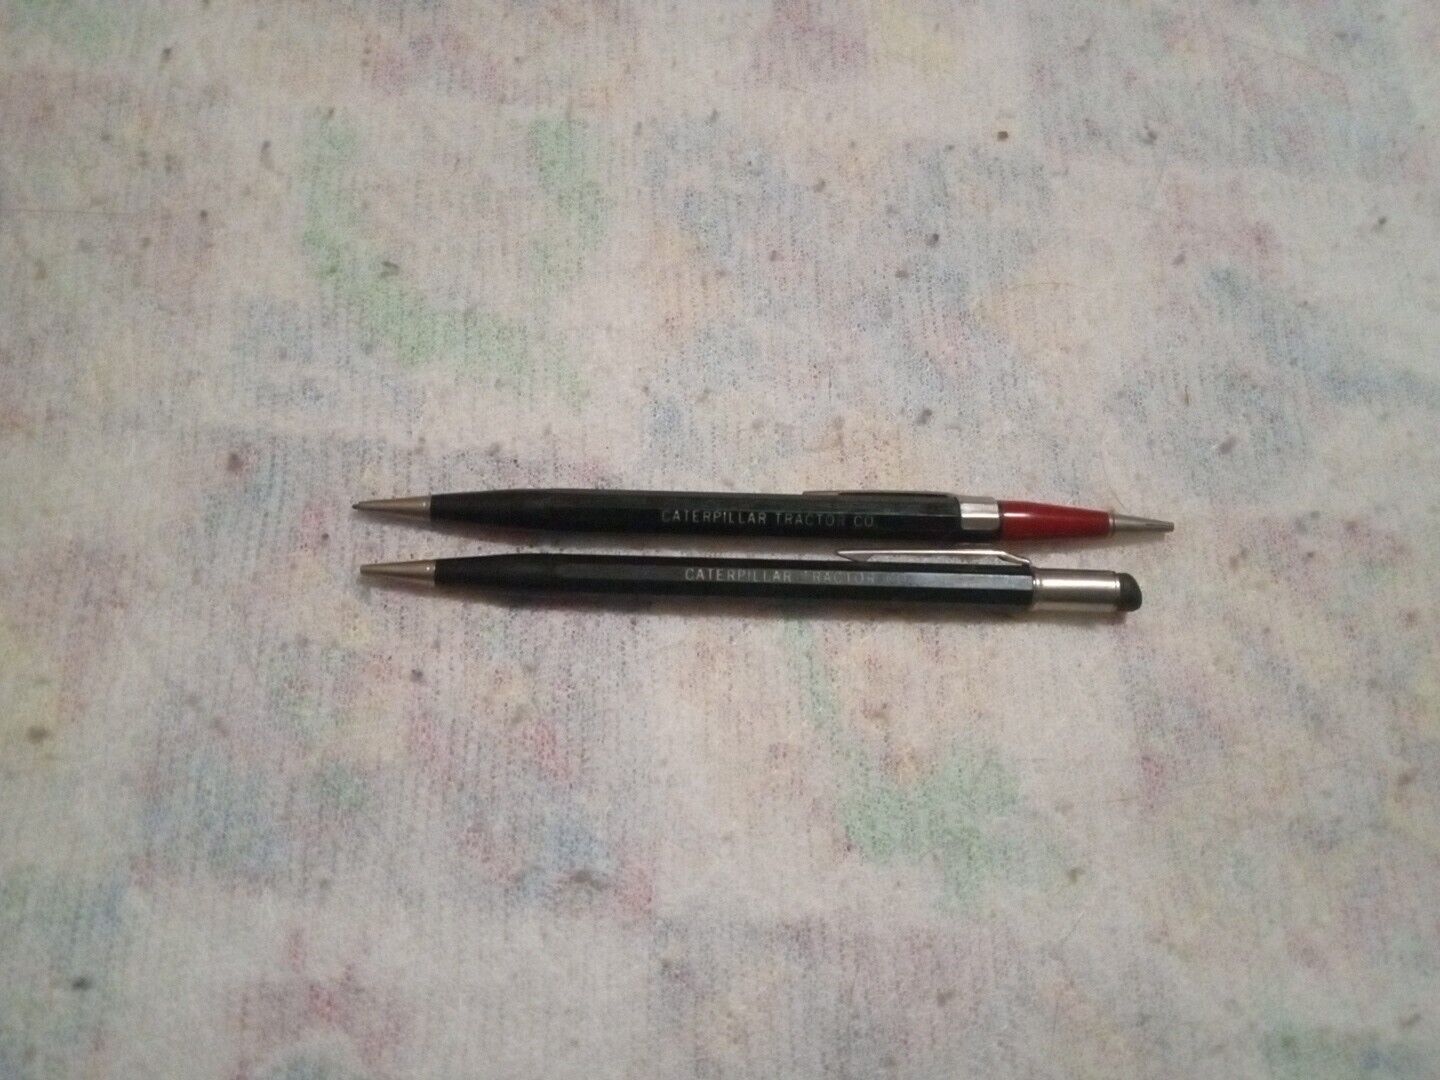 Vintage Caterpillar Autopoint Mechanical Pencil Lot Of 2 Works Great Rare USA 